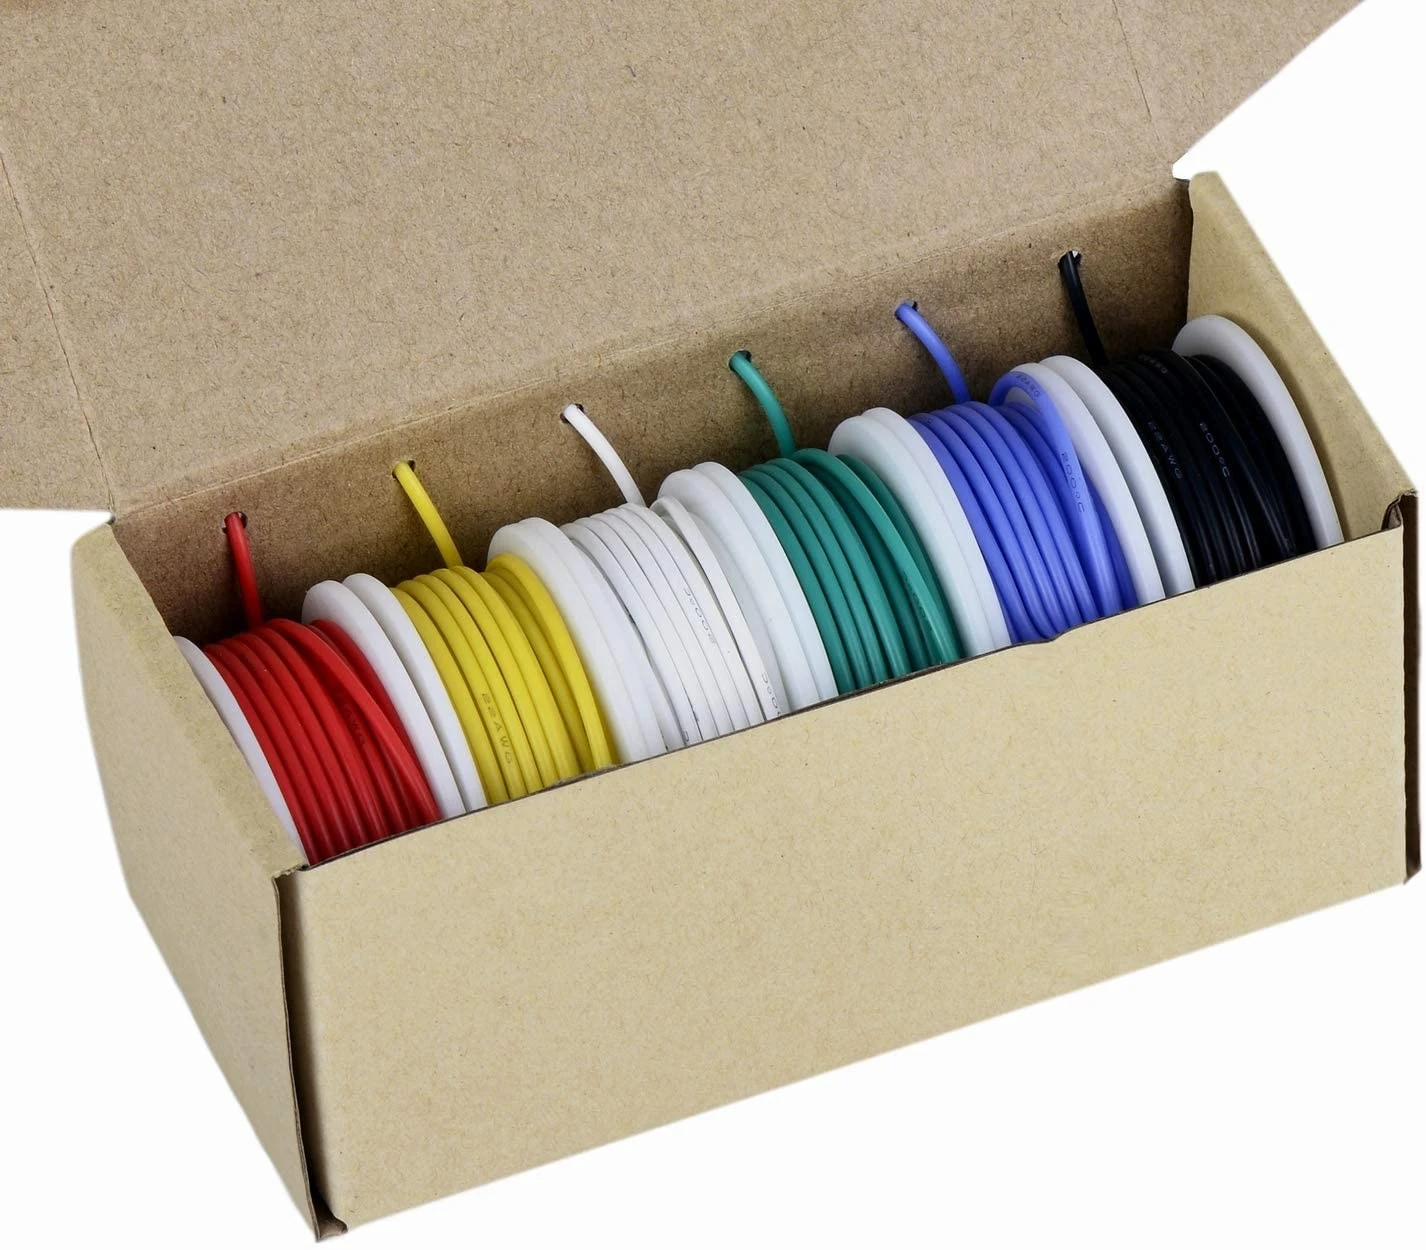 22AWG Stranded Wire, UL Approved, Tinned Copper Hookup Wire Kit 22 Gauge 300V for DIY, Flexible, PVC Insulated